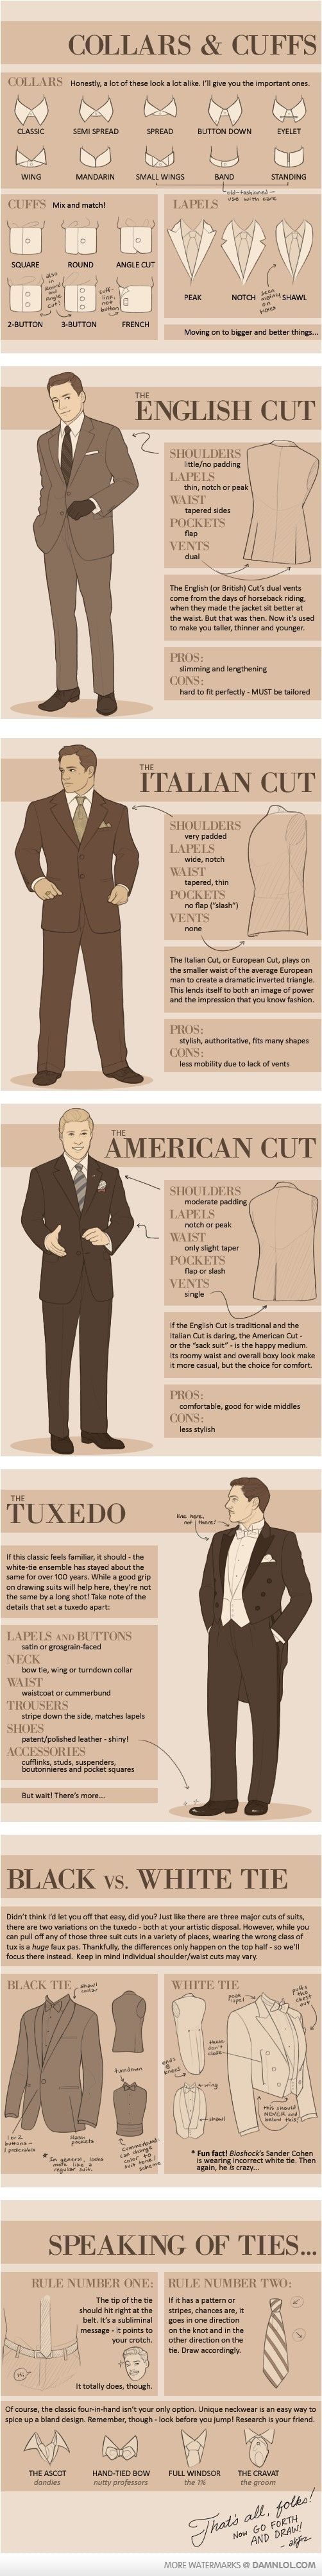 History: style guide